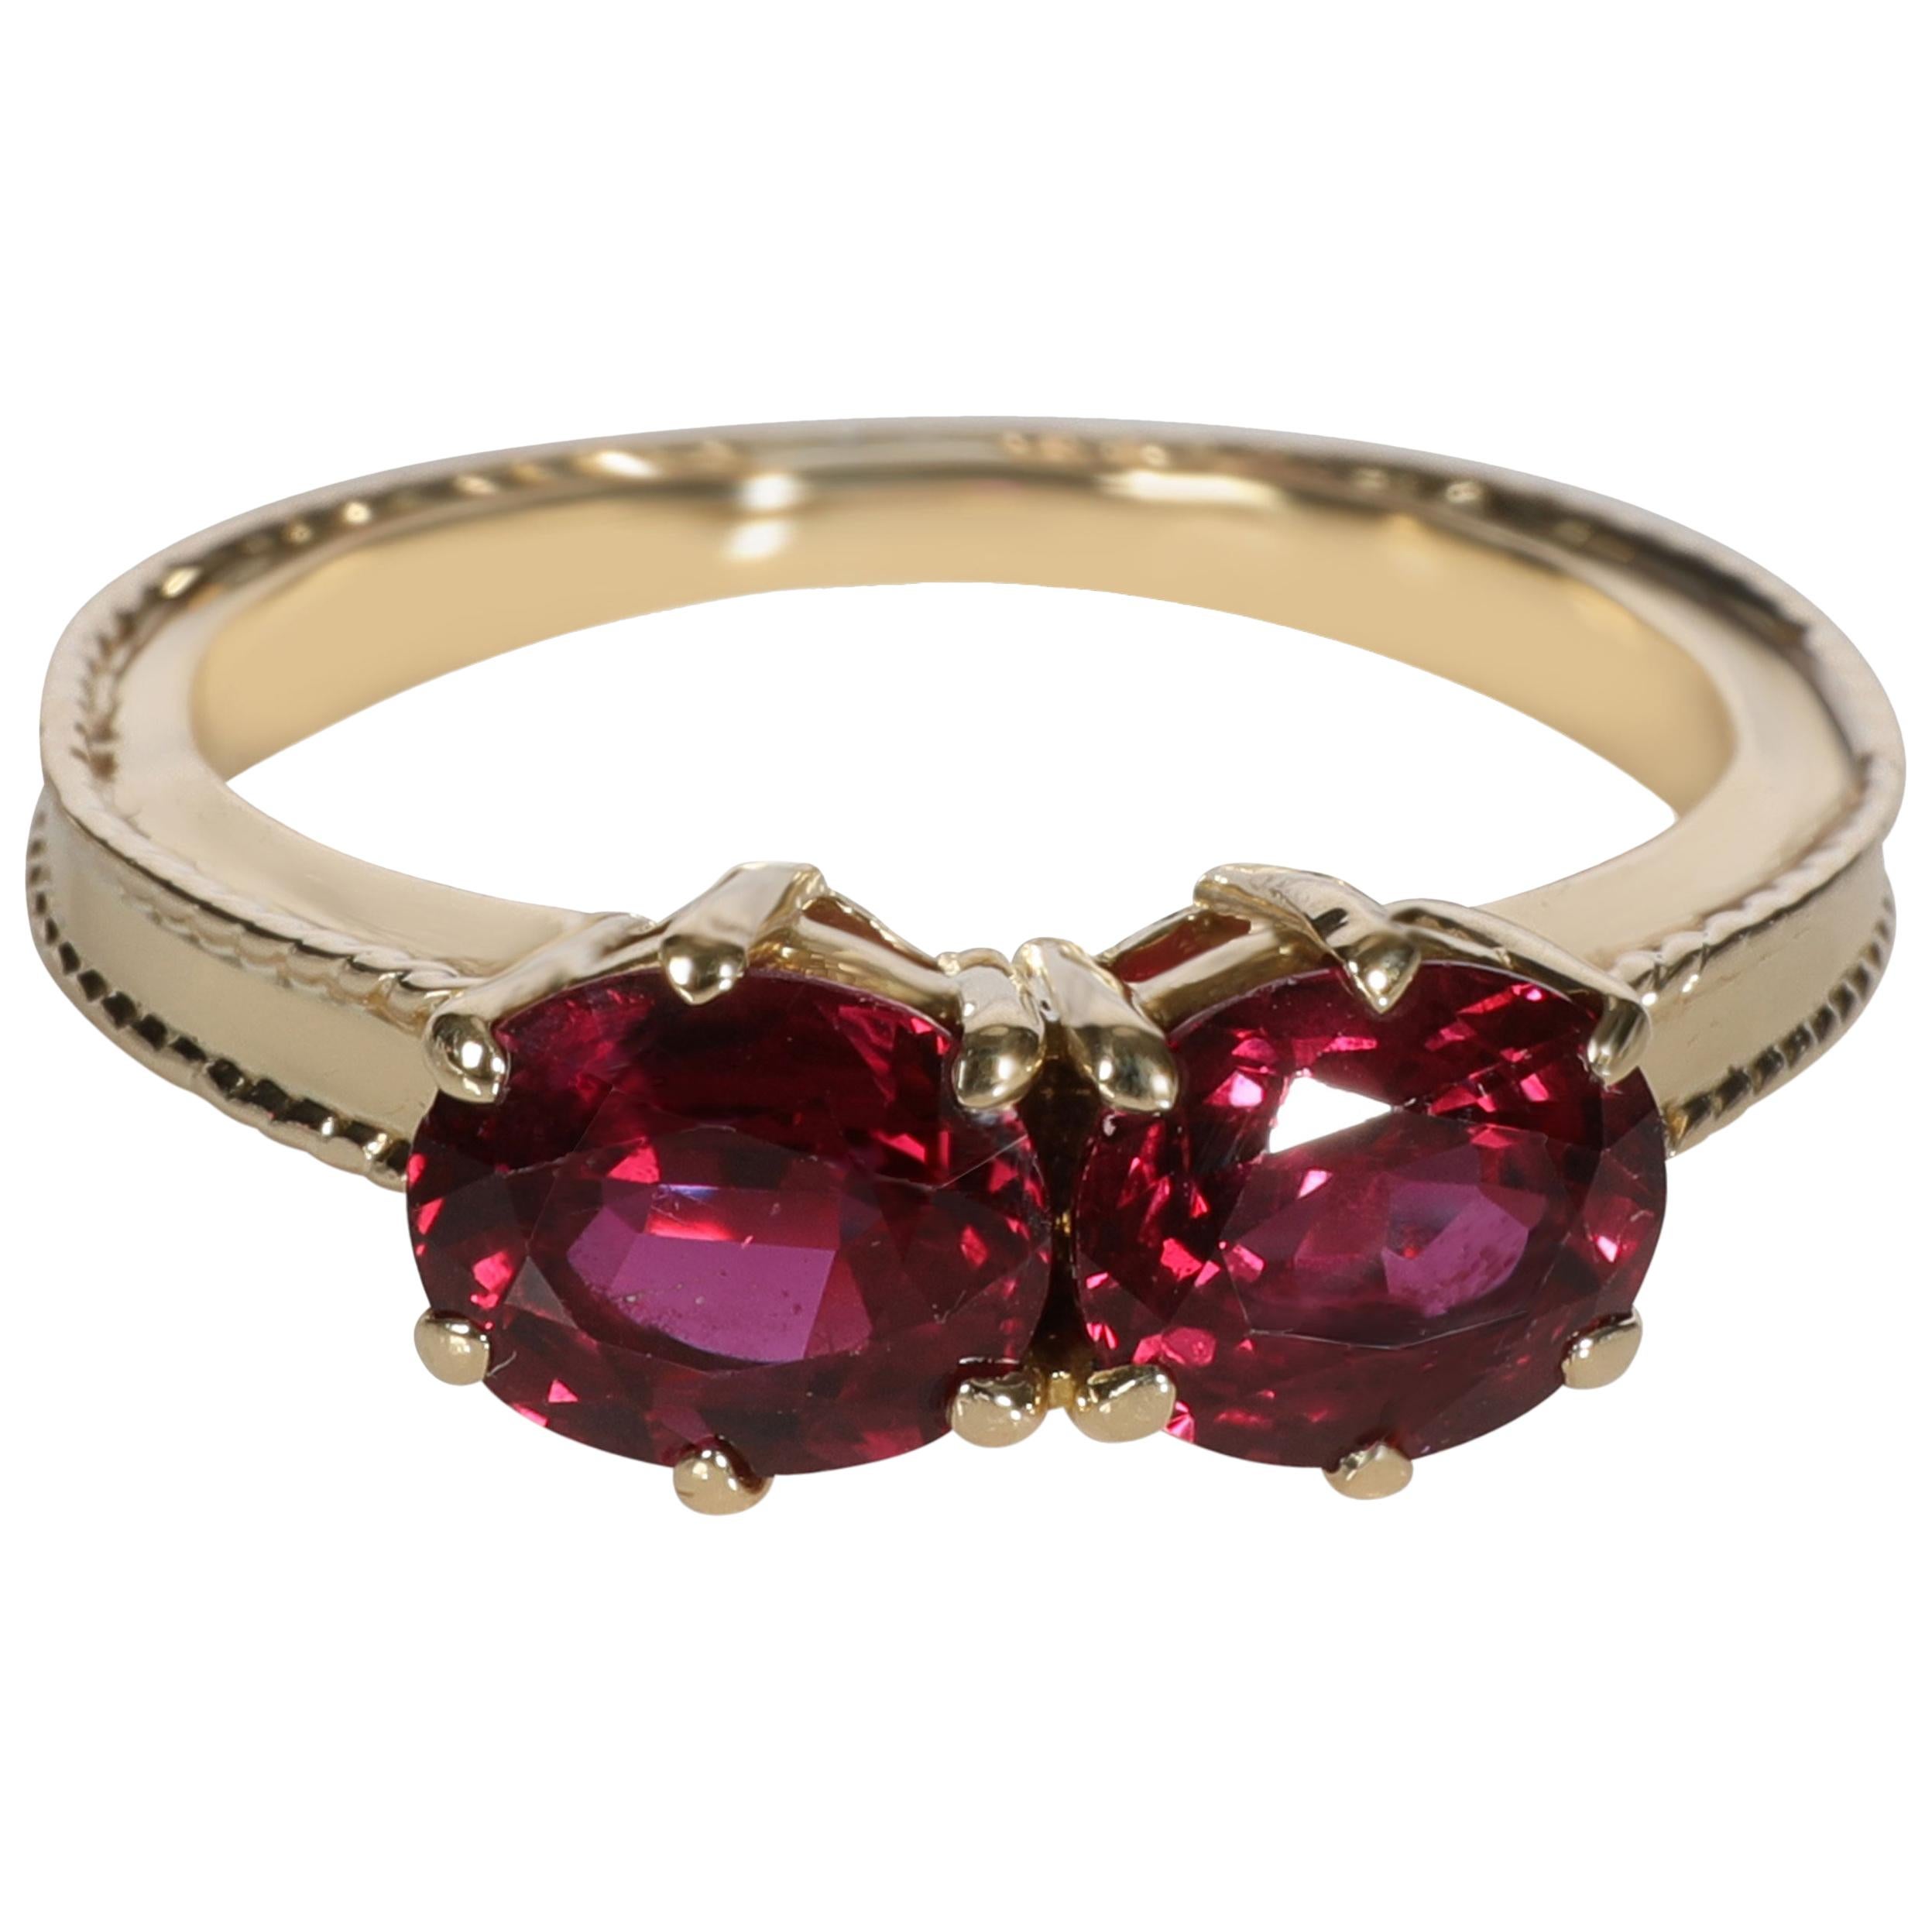 Tiffany & Co. Vintage Double Ruby Ring in 18 Karat Yellow Gold